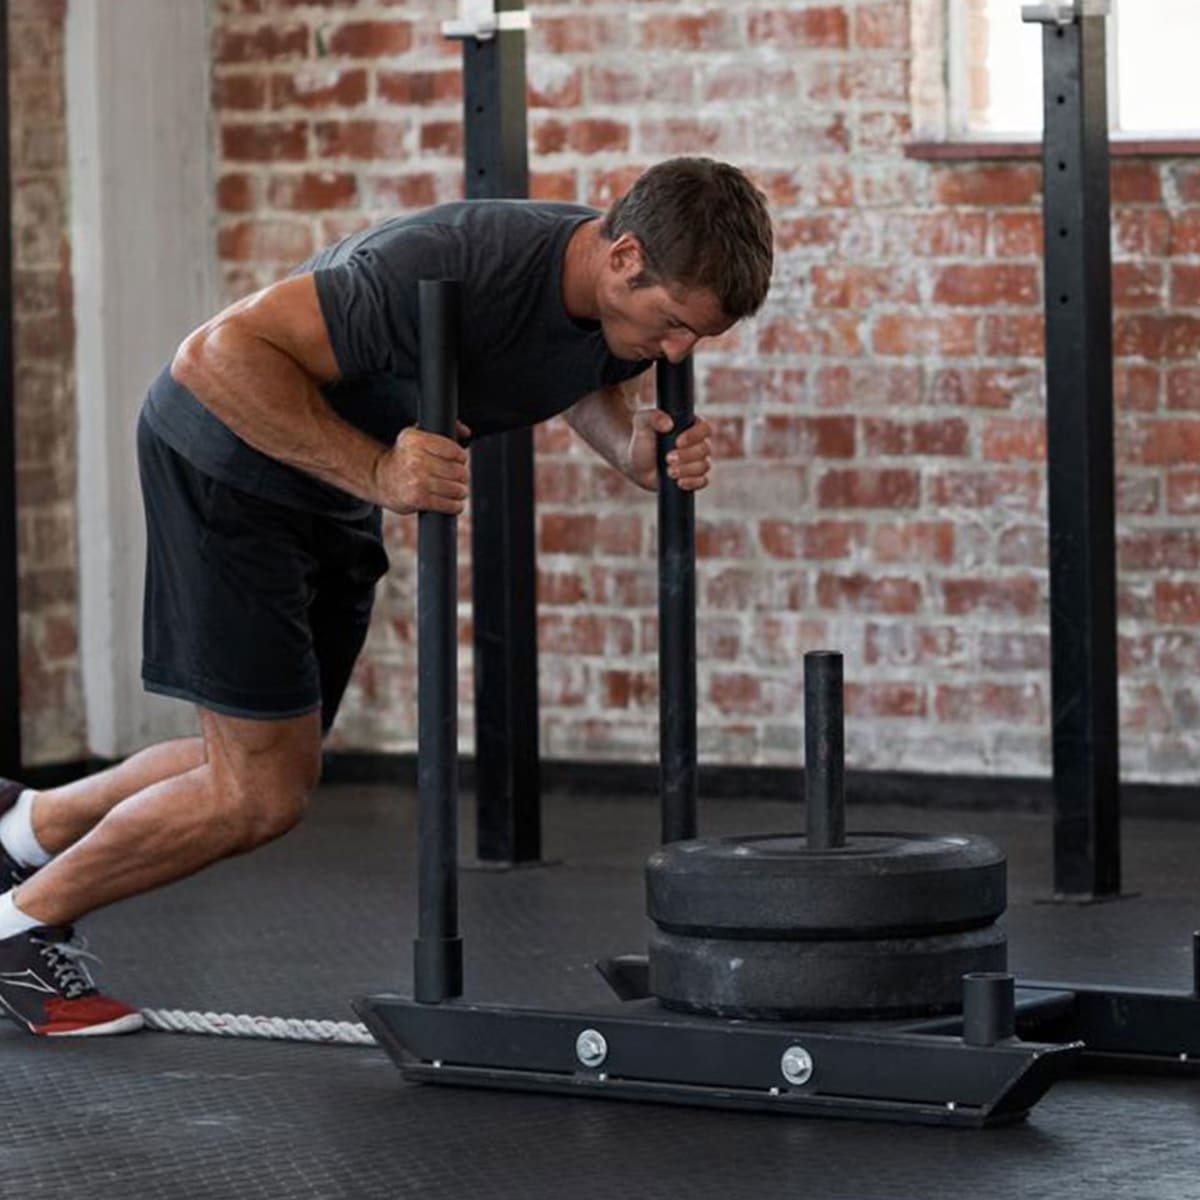 10 Sled Exercises That Train Your Entire Body - Men's Journal